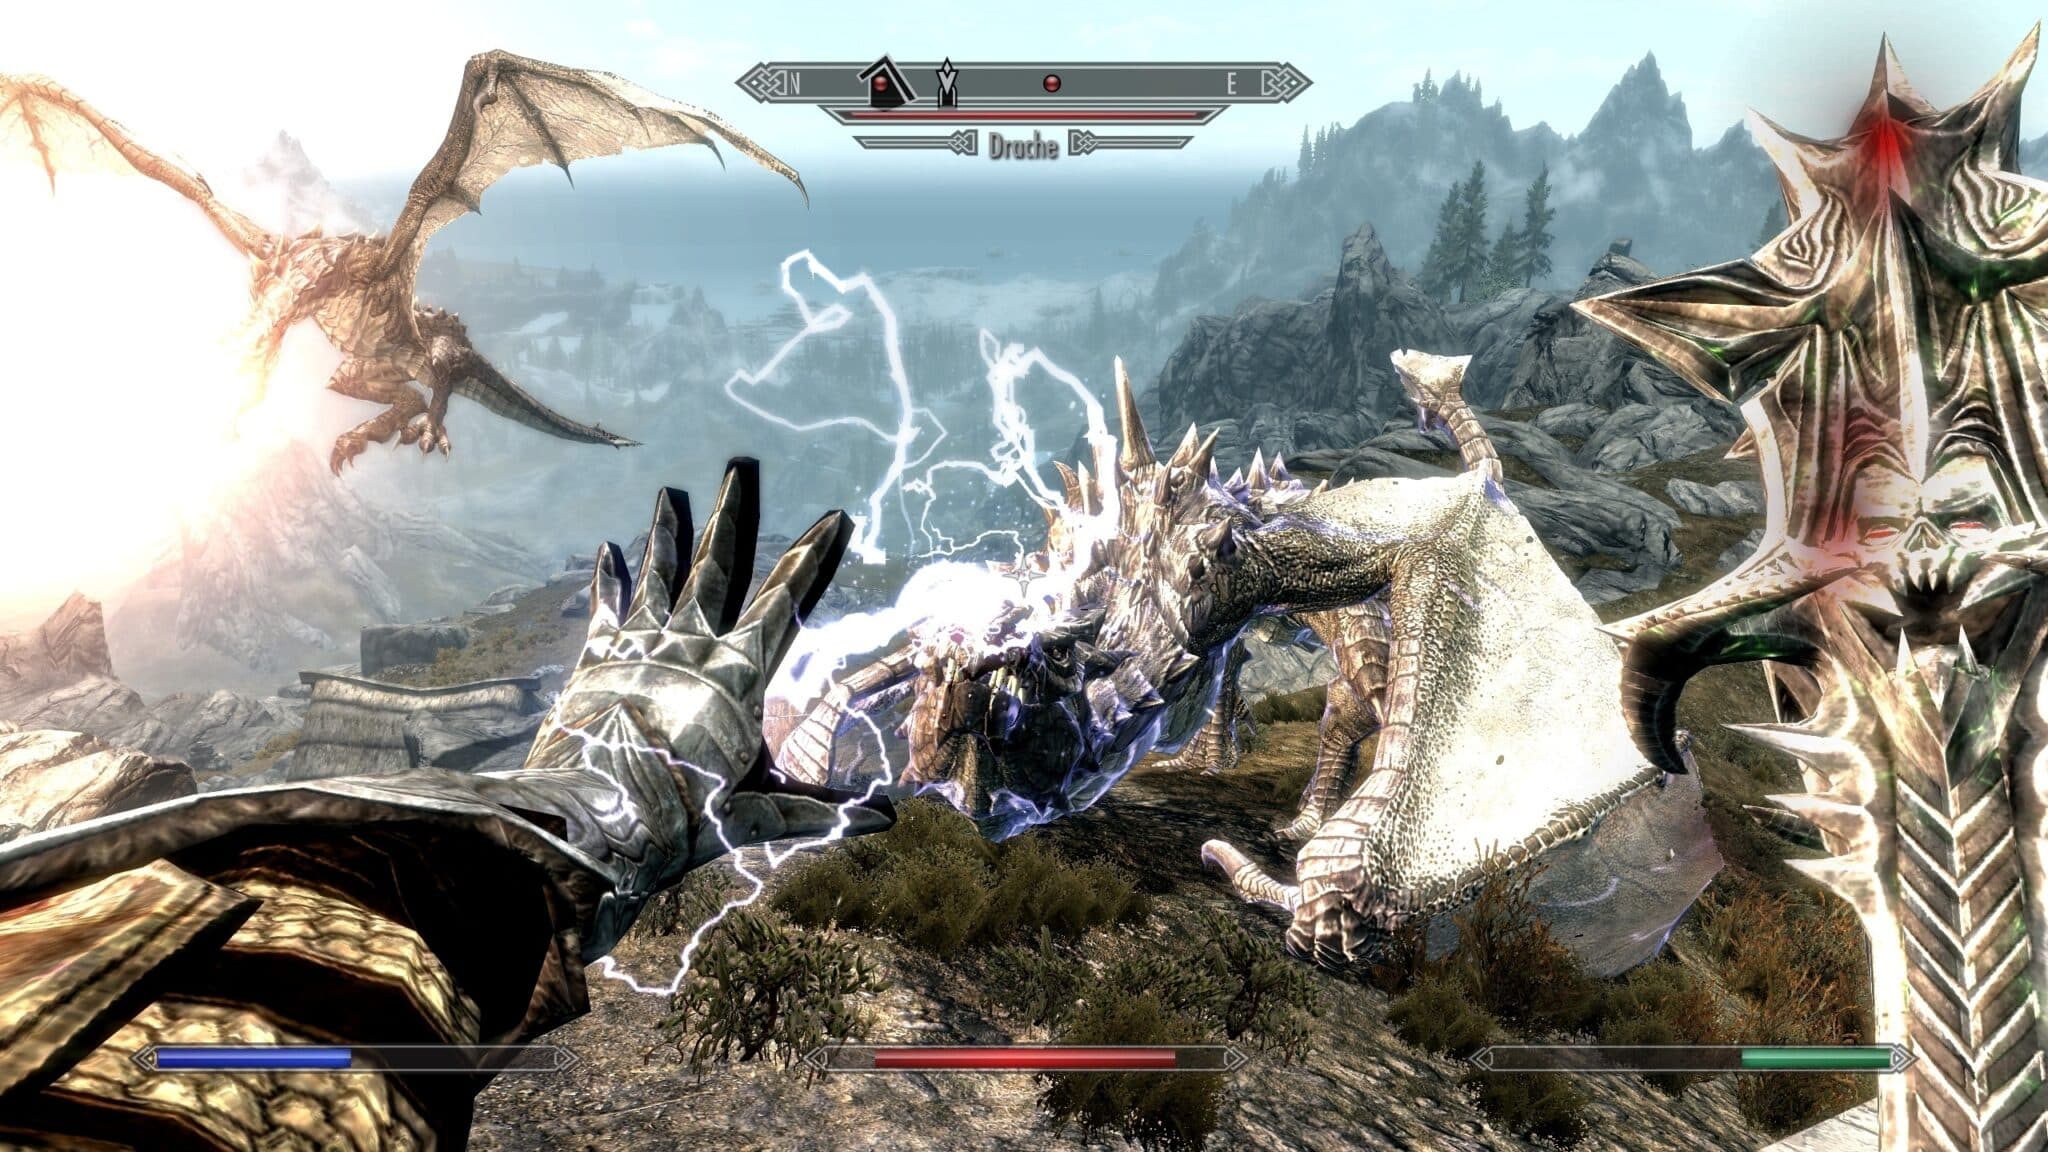 (09 Skyrim (here in the Special Edition from 2016) set completely new role-playing game standards in 2011. For the dragon battles alone!)